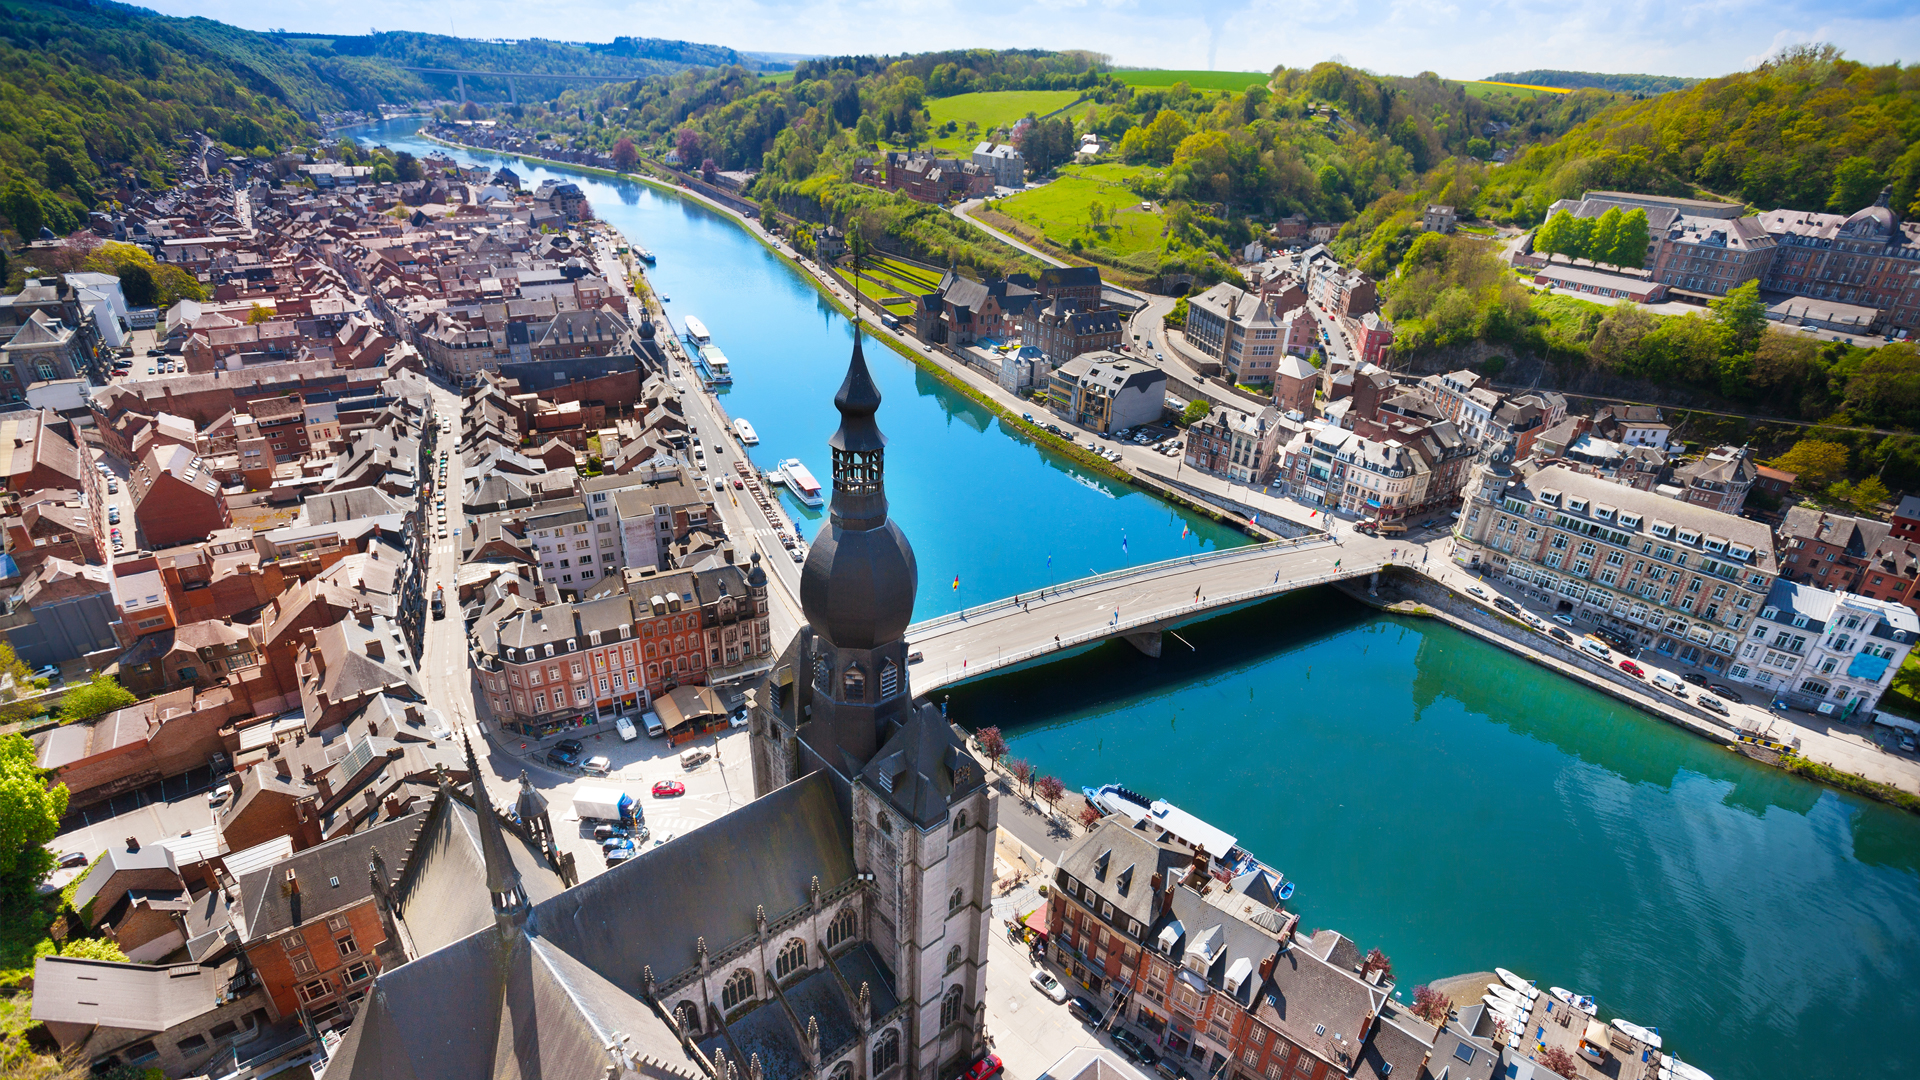 Scenic aerial view of a European city with wide river flowing through